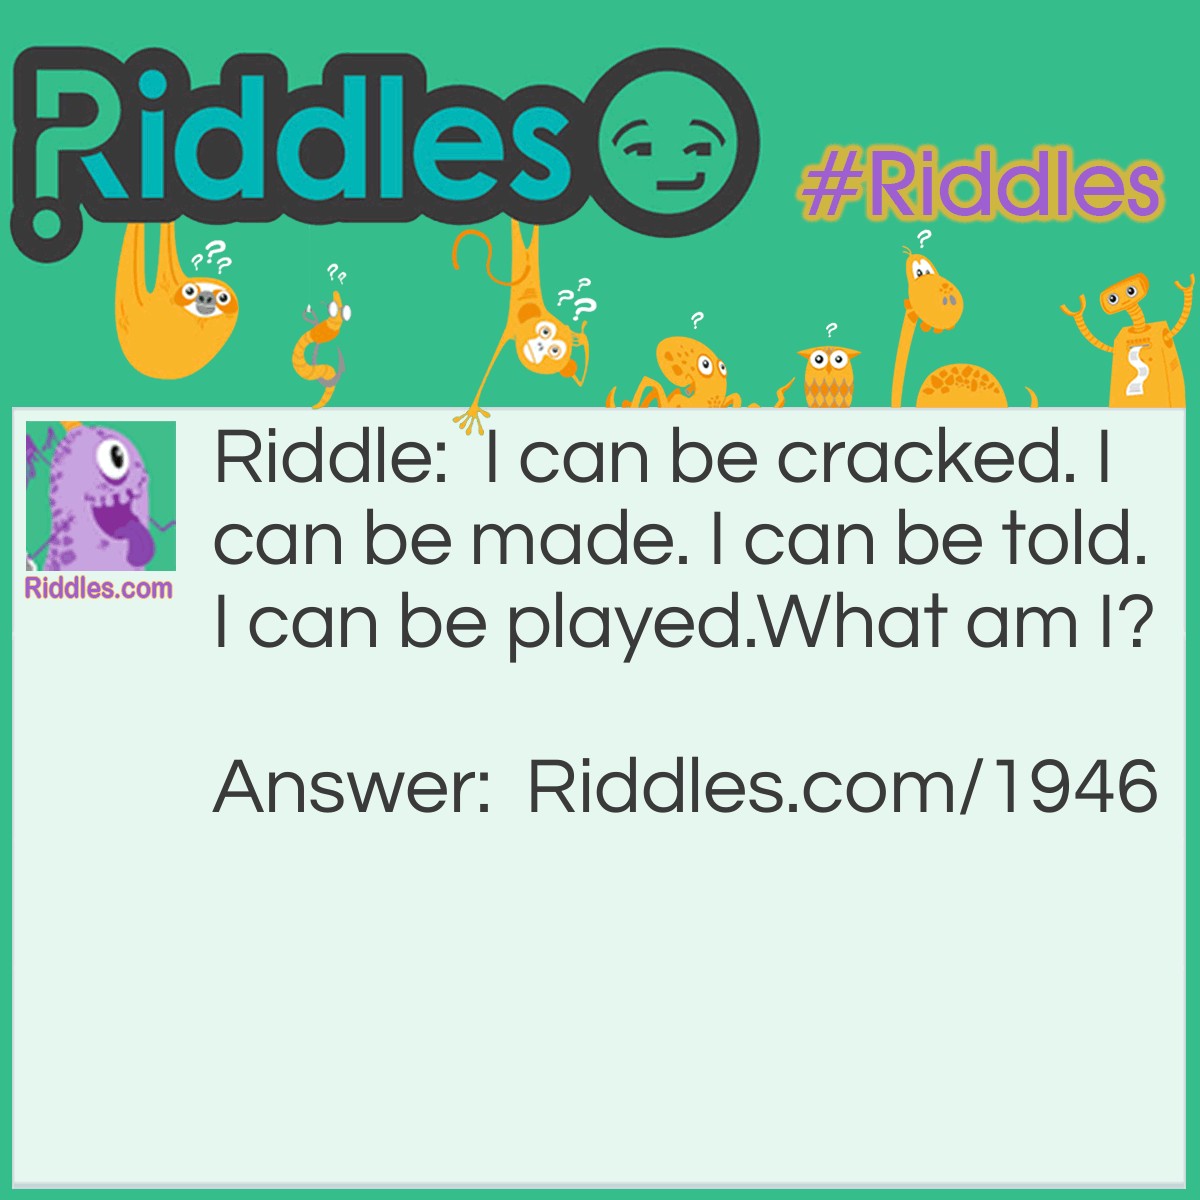 Riddle: I can be cracked. I can be made. I can be told. I can be played.
What am I? Answer: A joke.